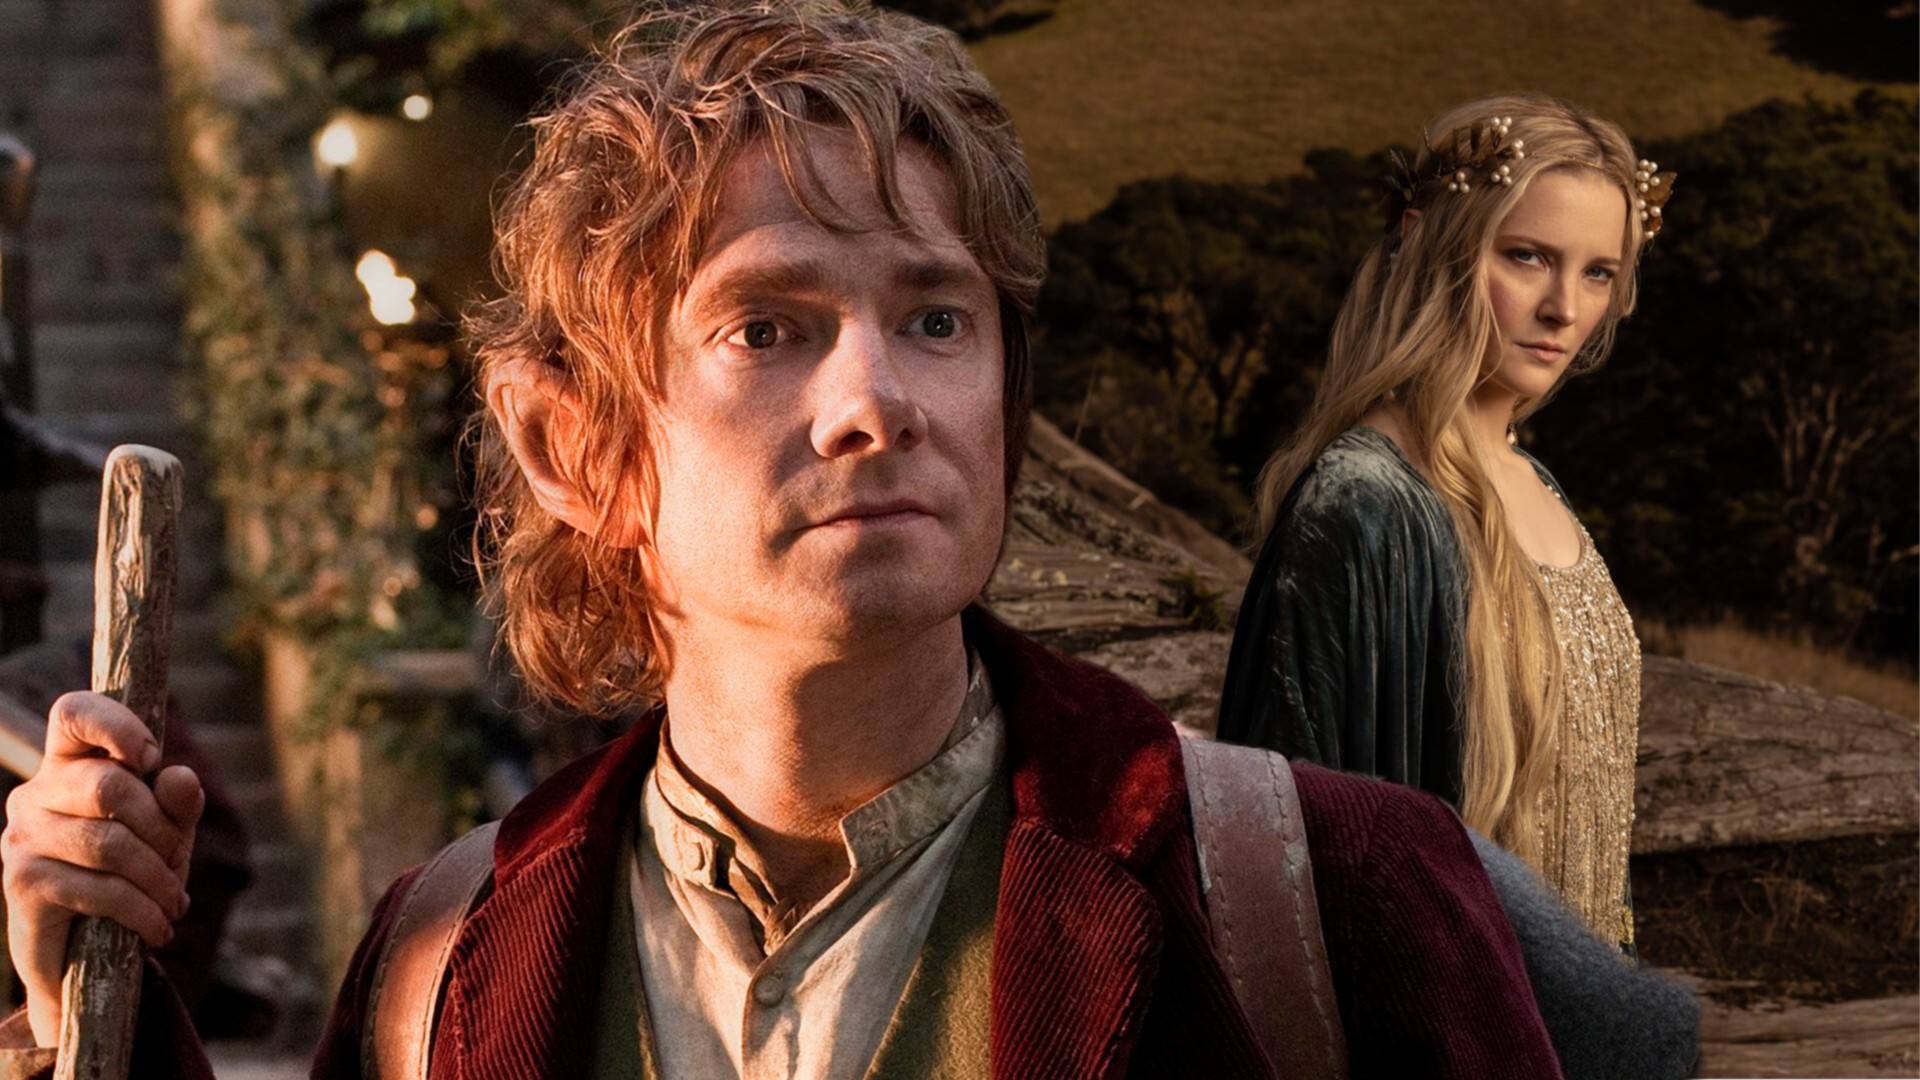 Lord of the Rings' Spinoff Series Gets Release Date on Amazon Prime